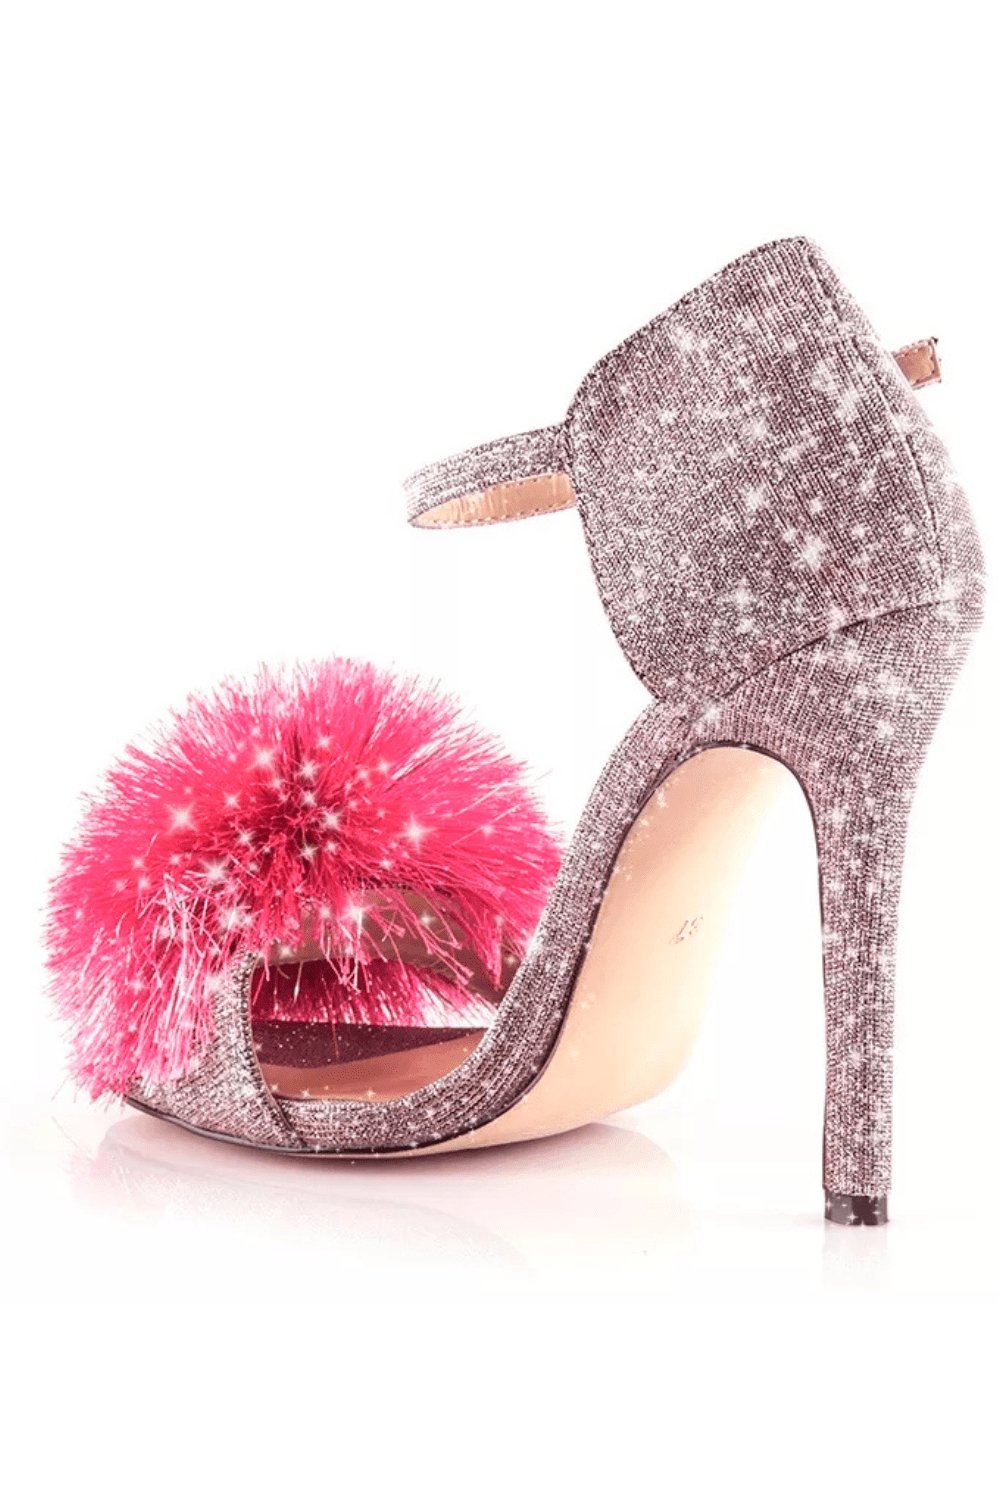 Glitter Stiletto High Heel Pink Sandals With Fluffy Fur Shoes - TGC Boutique - Pink Heels